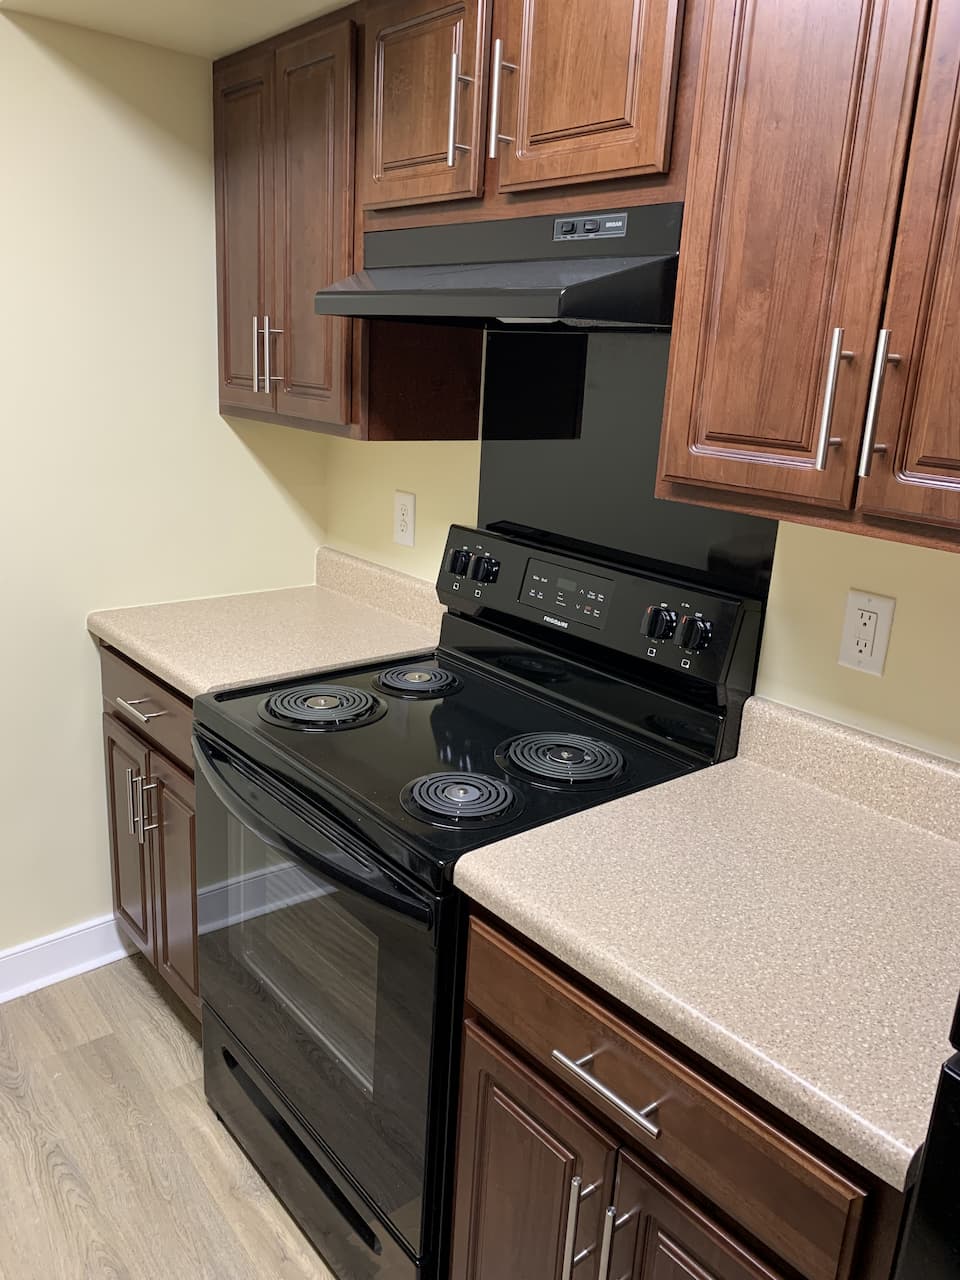 New kitchen renovation and appliances in Afton